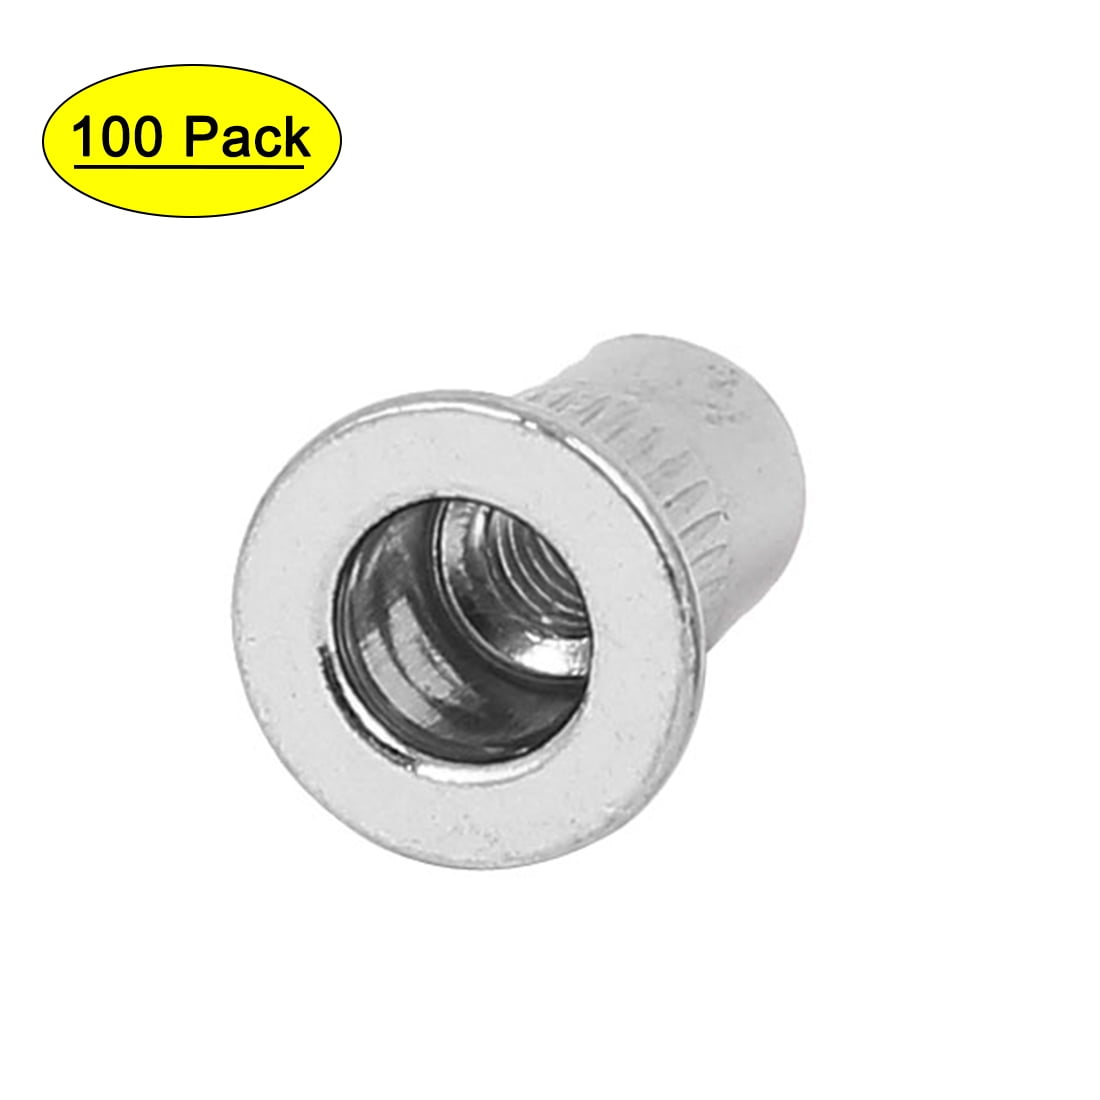 M4-4mm RIVNUTS KNURLED FLANGE THREADED STAINLESS STEEL INSERT RIVET NUTS 